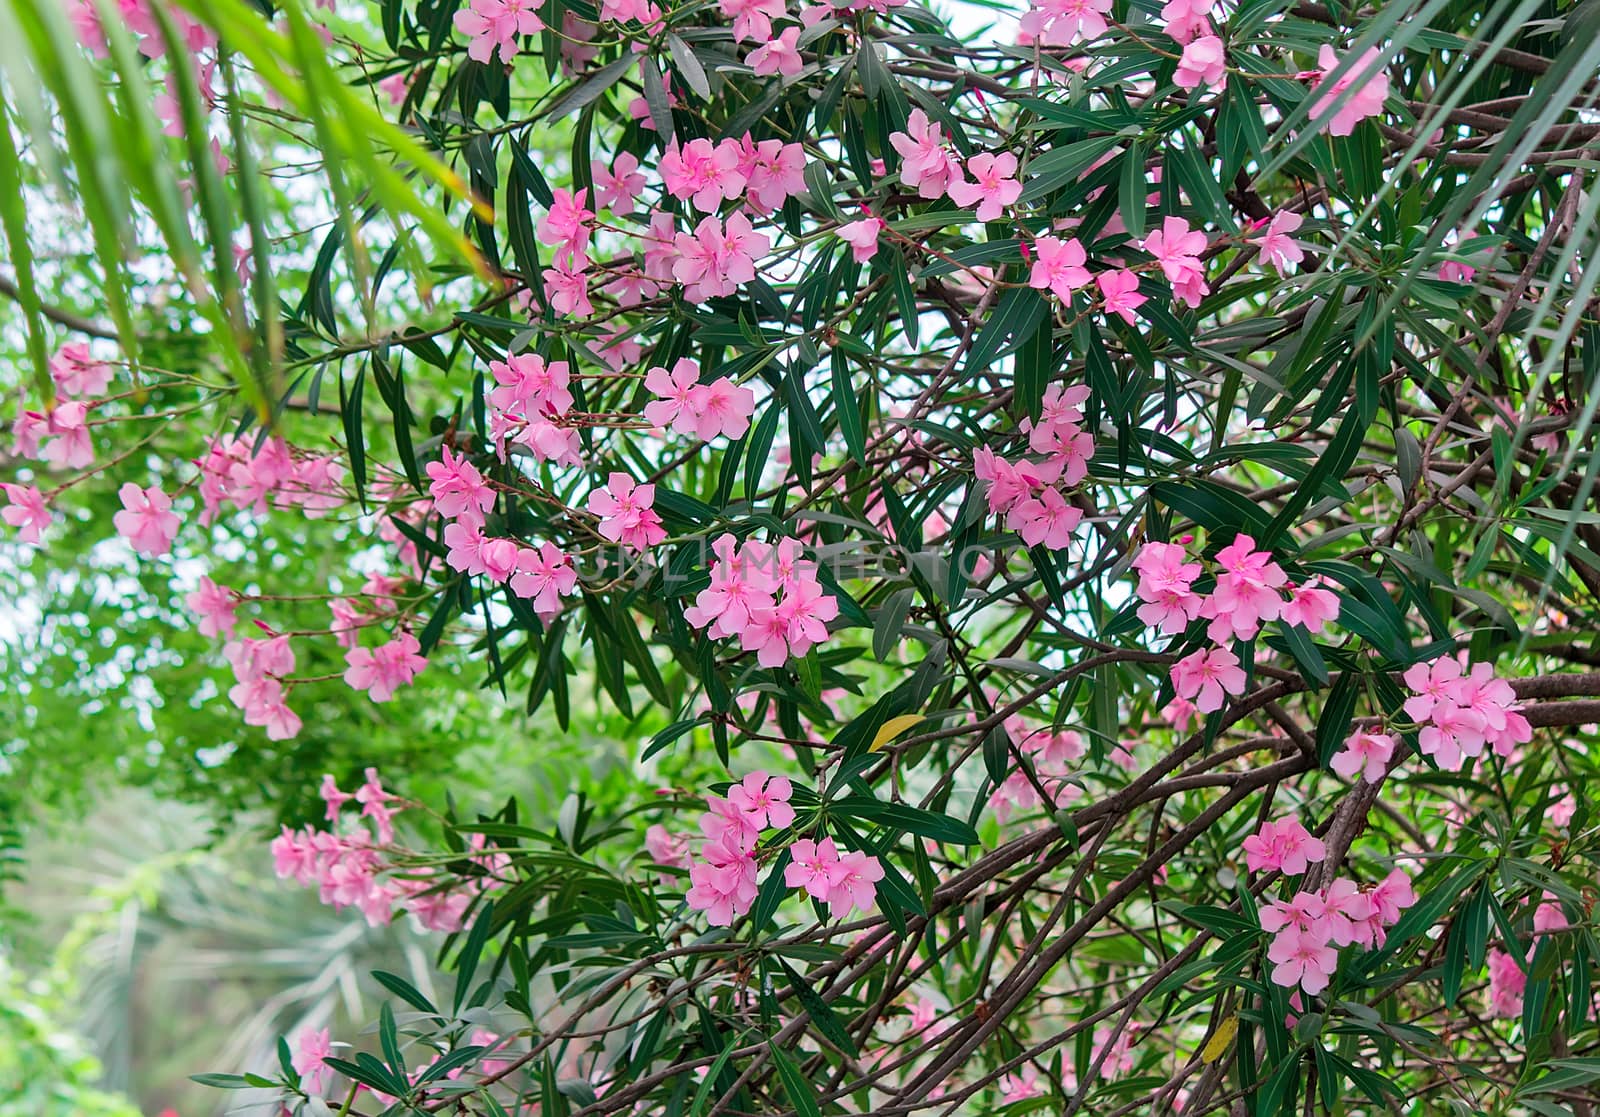 Blooming oleander with a large number of beautiful delicate pink flowers and green leaves lit by the sun.